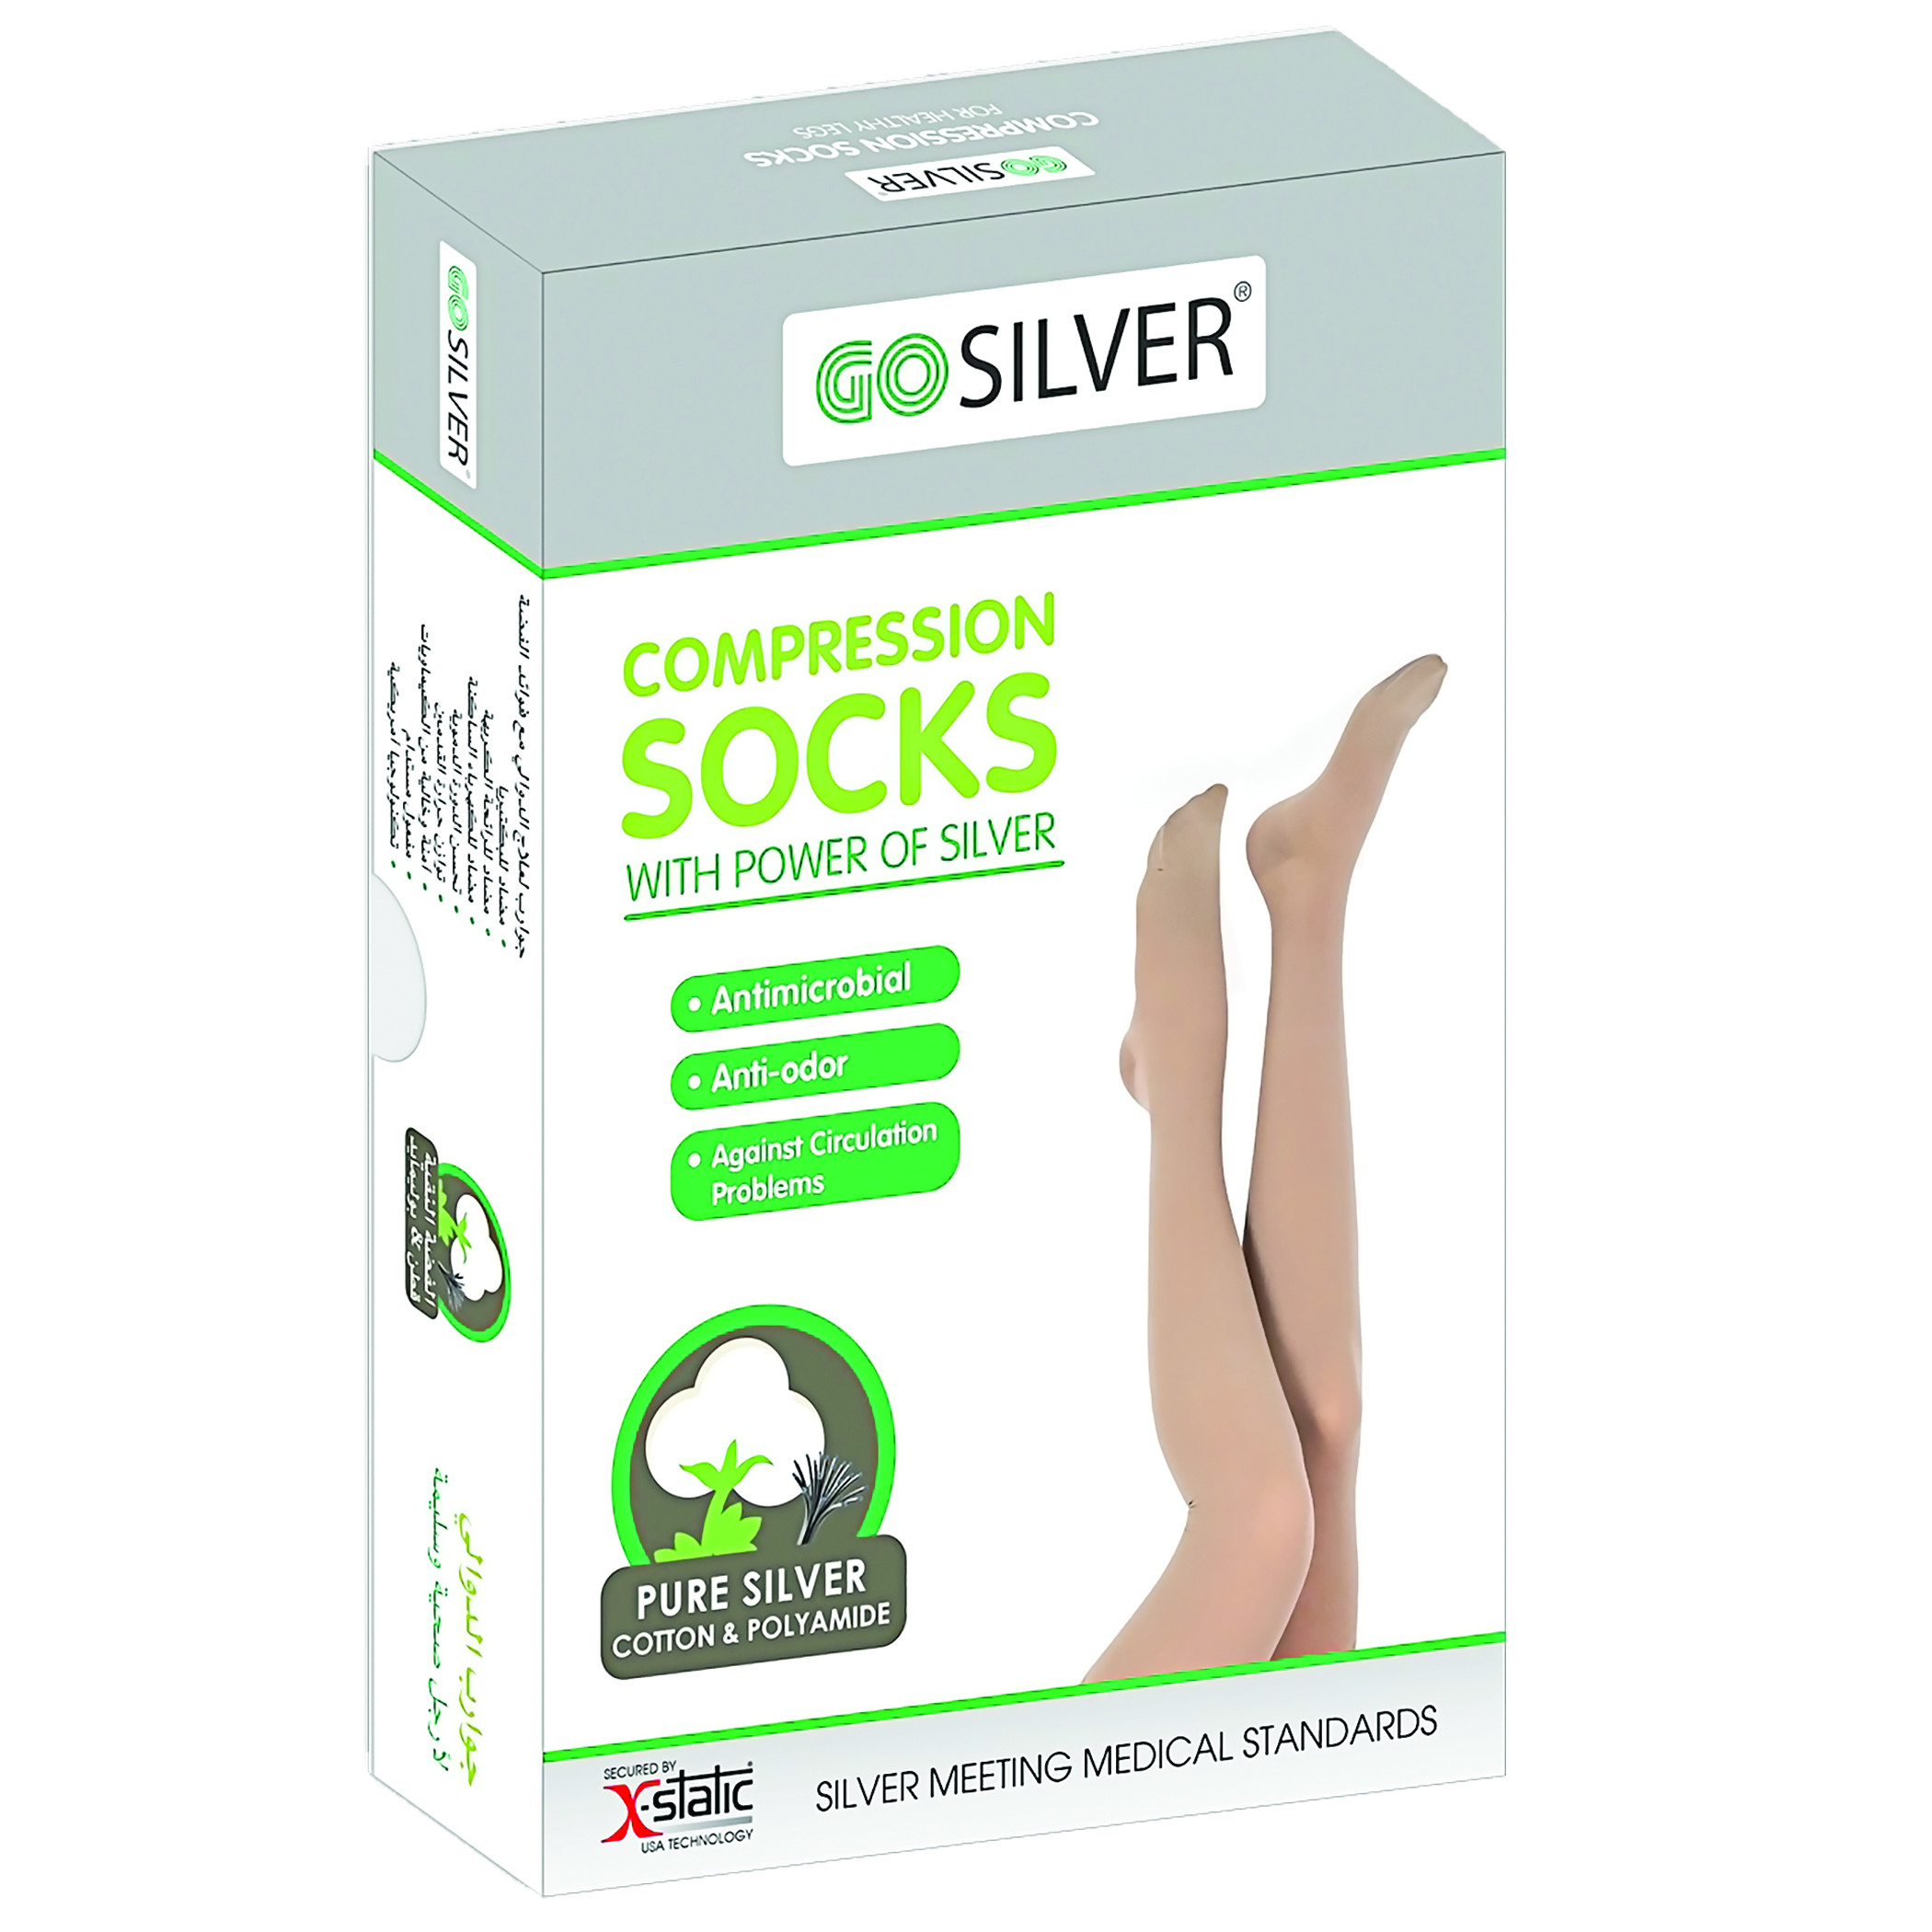 Go Silver Over Knee High, Compression Socks, Class 3 (34-46 mmHg) Open Toe Flesh Size 5